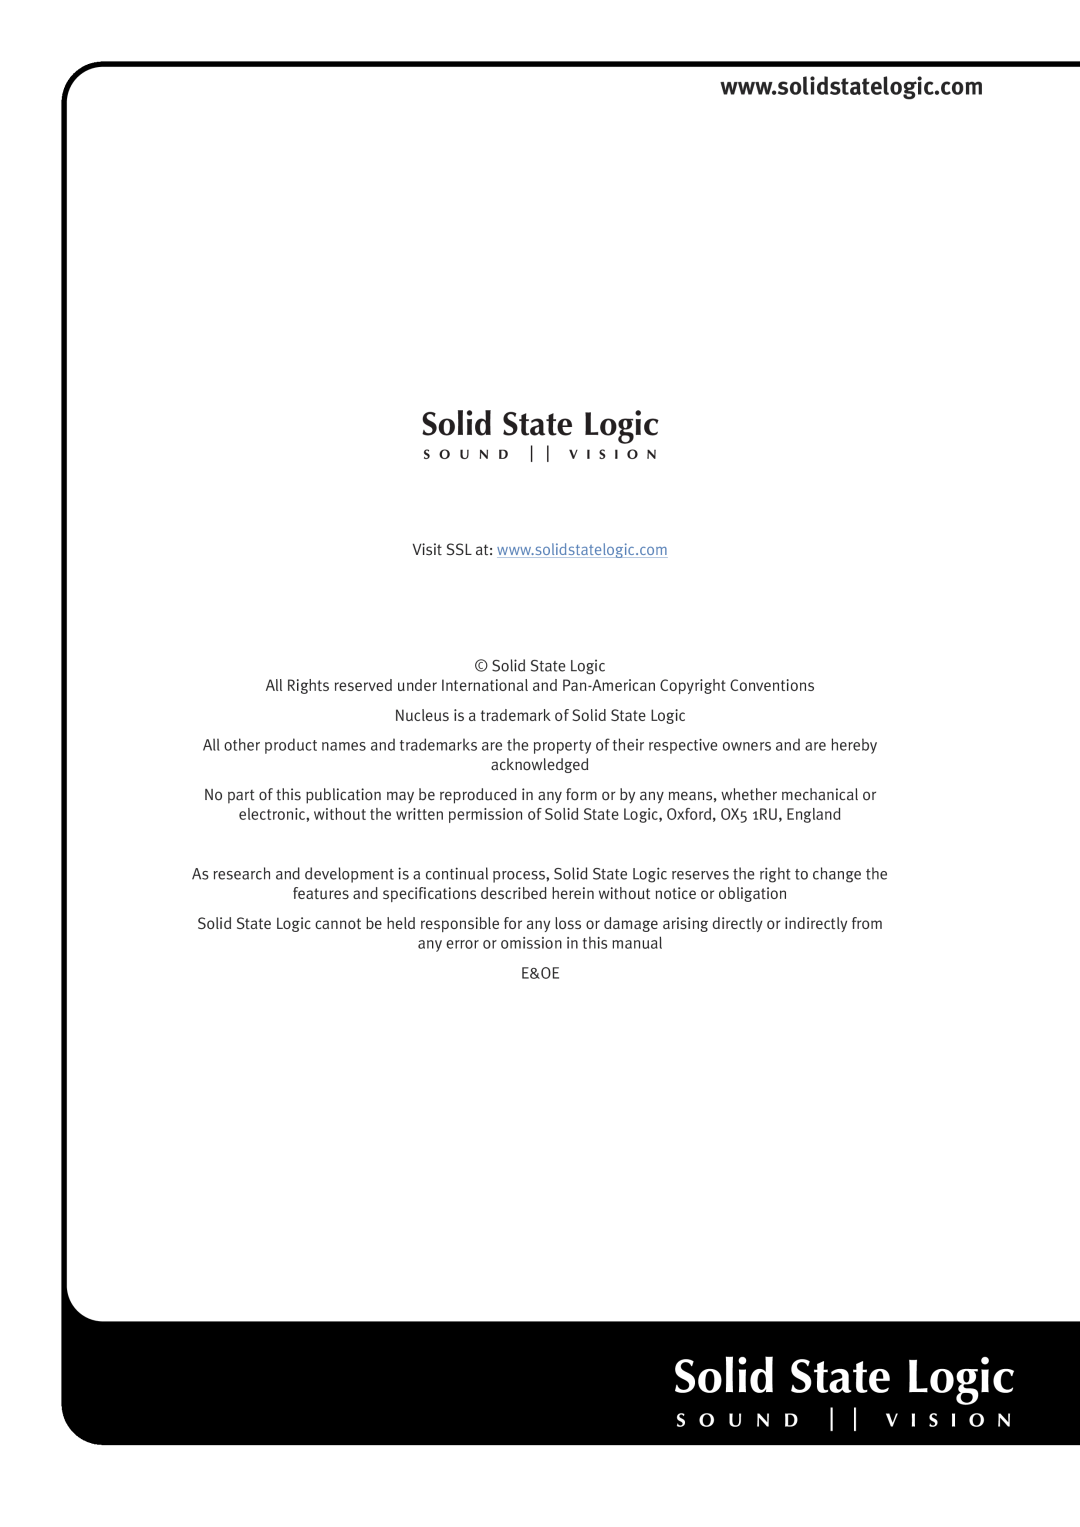 Solid State Logic 20012919, 20012913, 20012912, 20012911 manual Nucleus is a trademark of Solid State Logic, acknowledged 